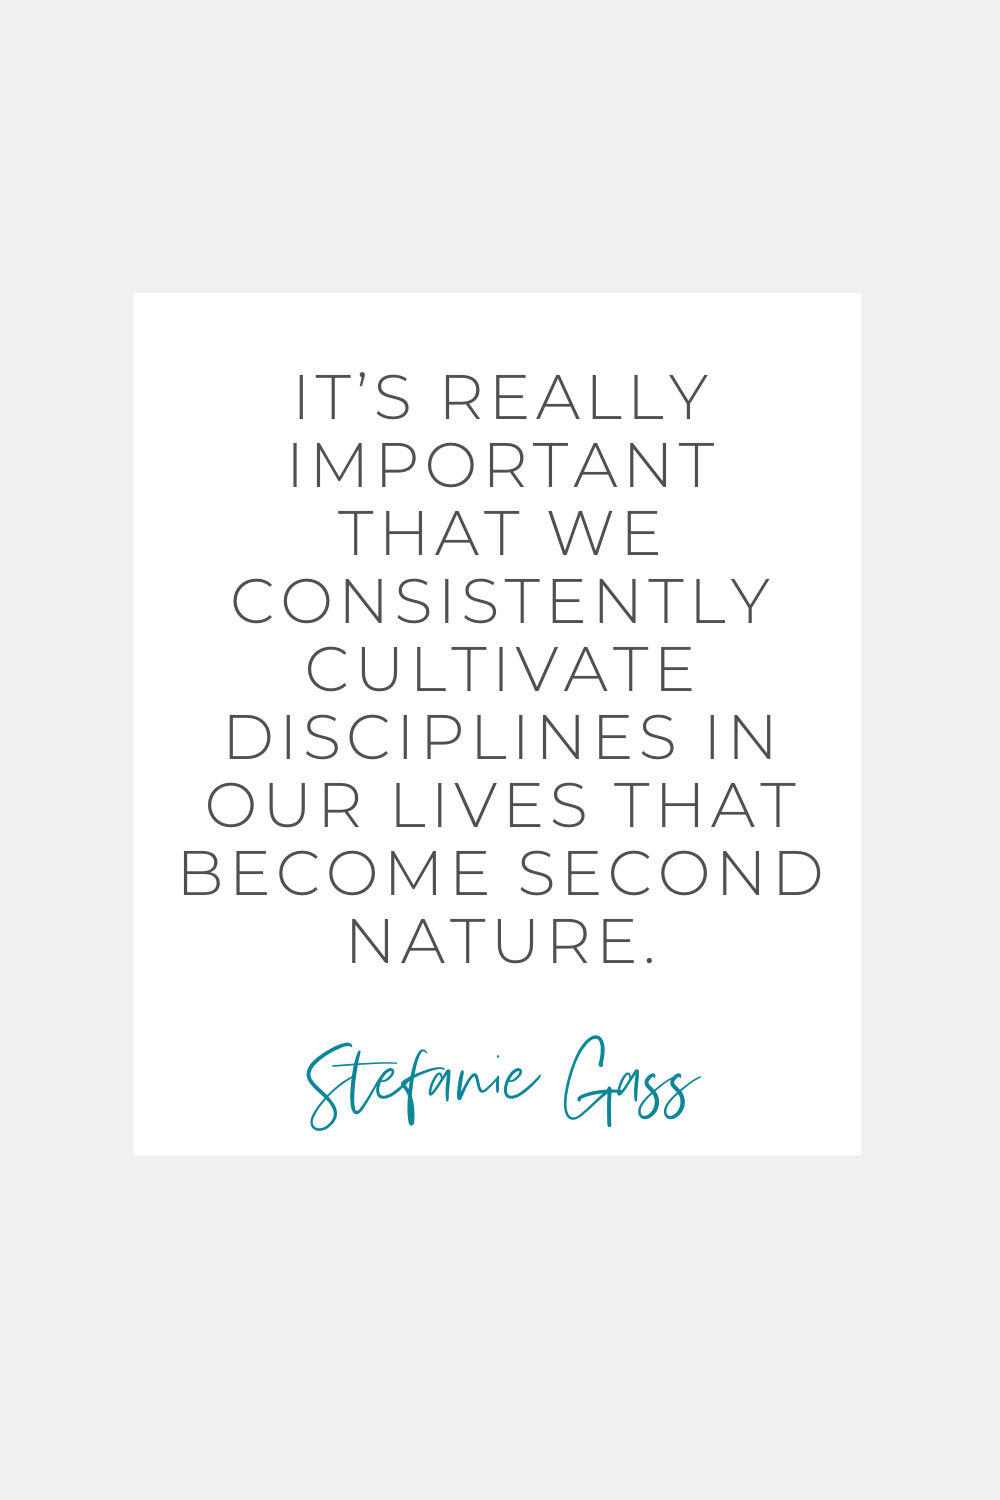 Stefanie Gass quote "it's really important that we consistently cultivate disciplines in our lives that become second nature."